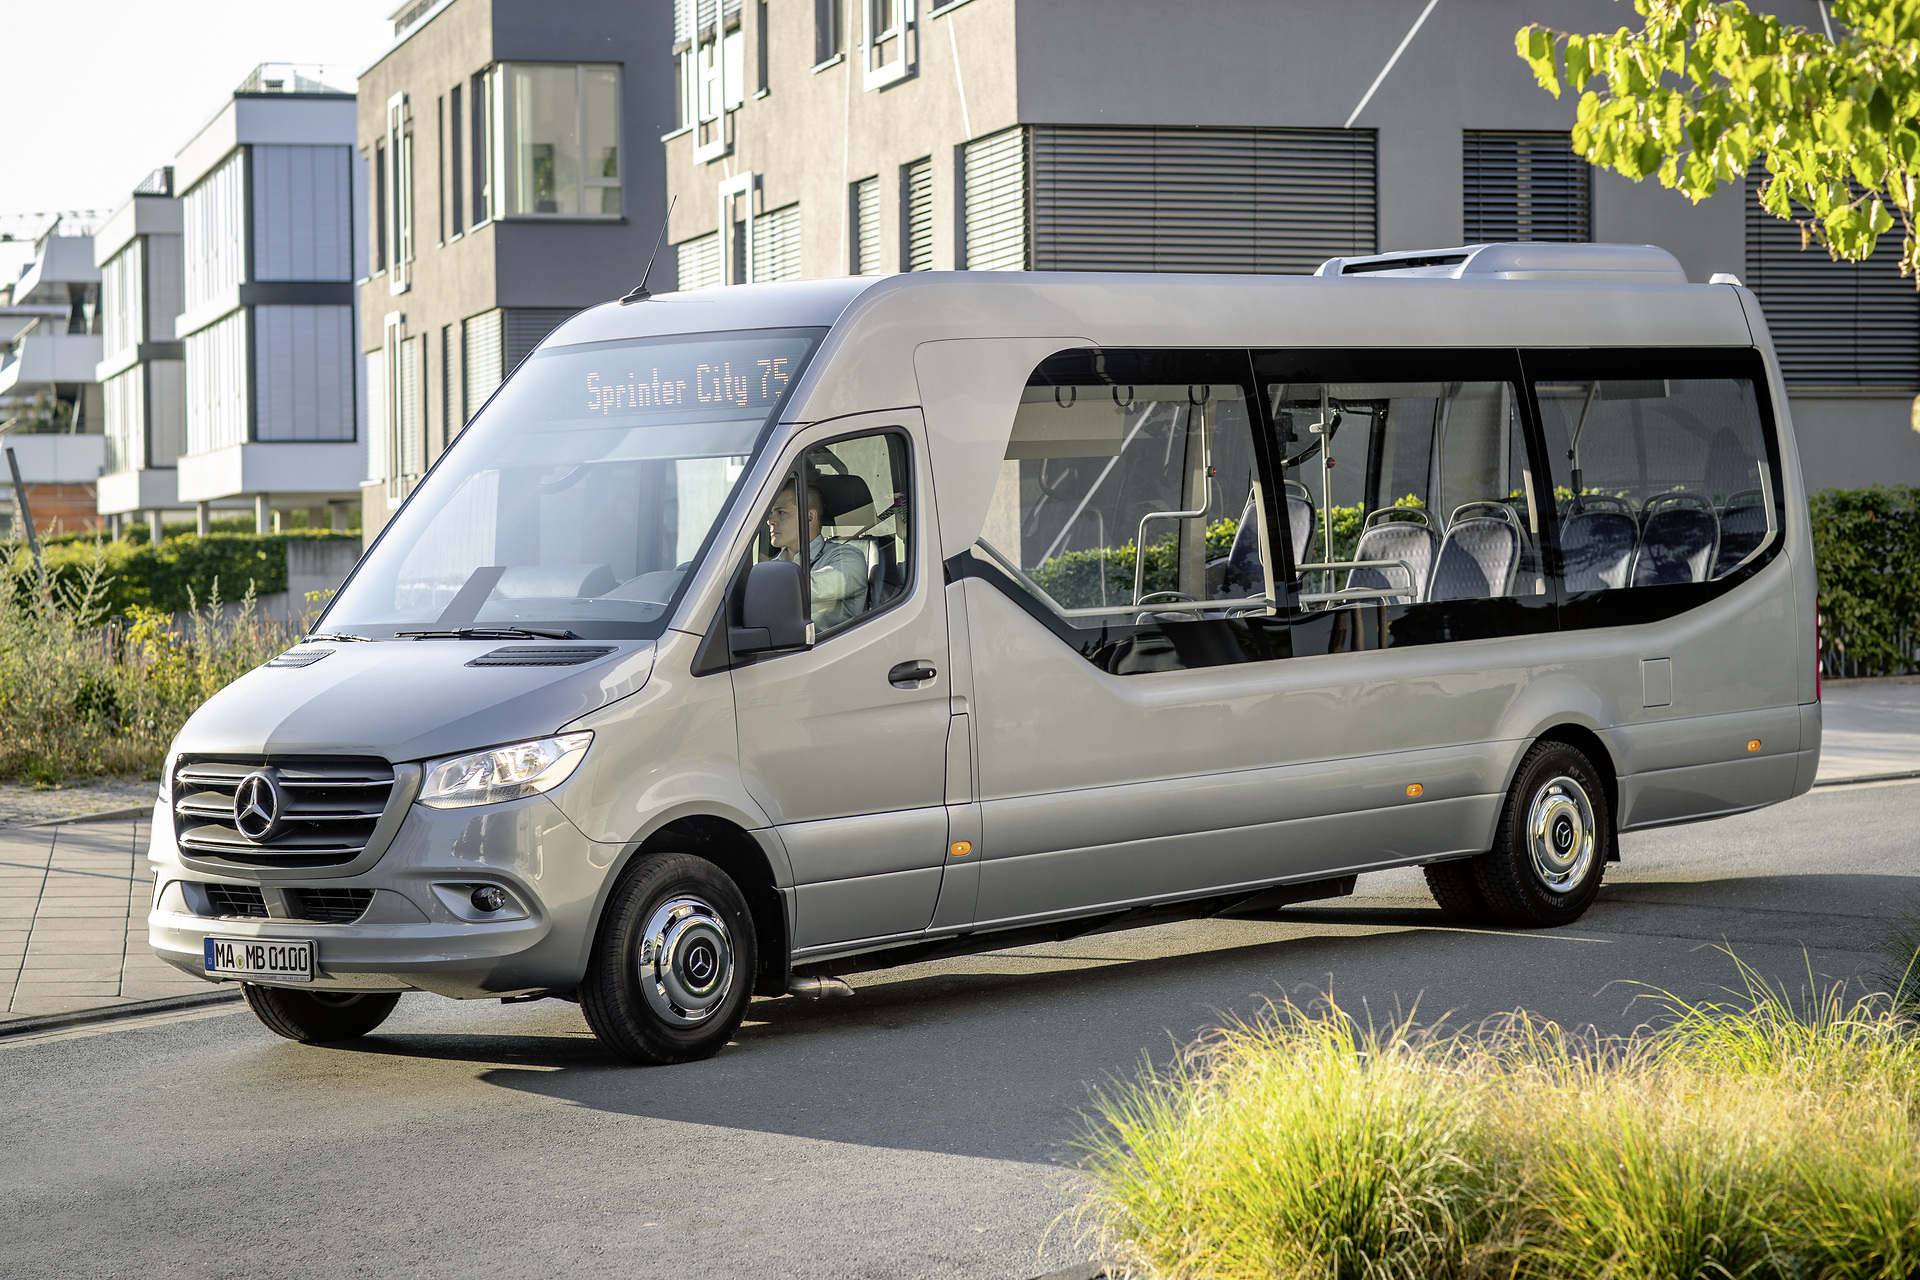 Mercedes-Benz minibuses: New minibuses from Mercedes-Benz clear for launch at the IAA International Motor Show